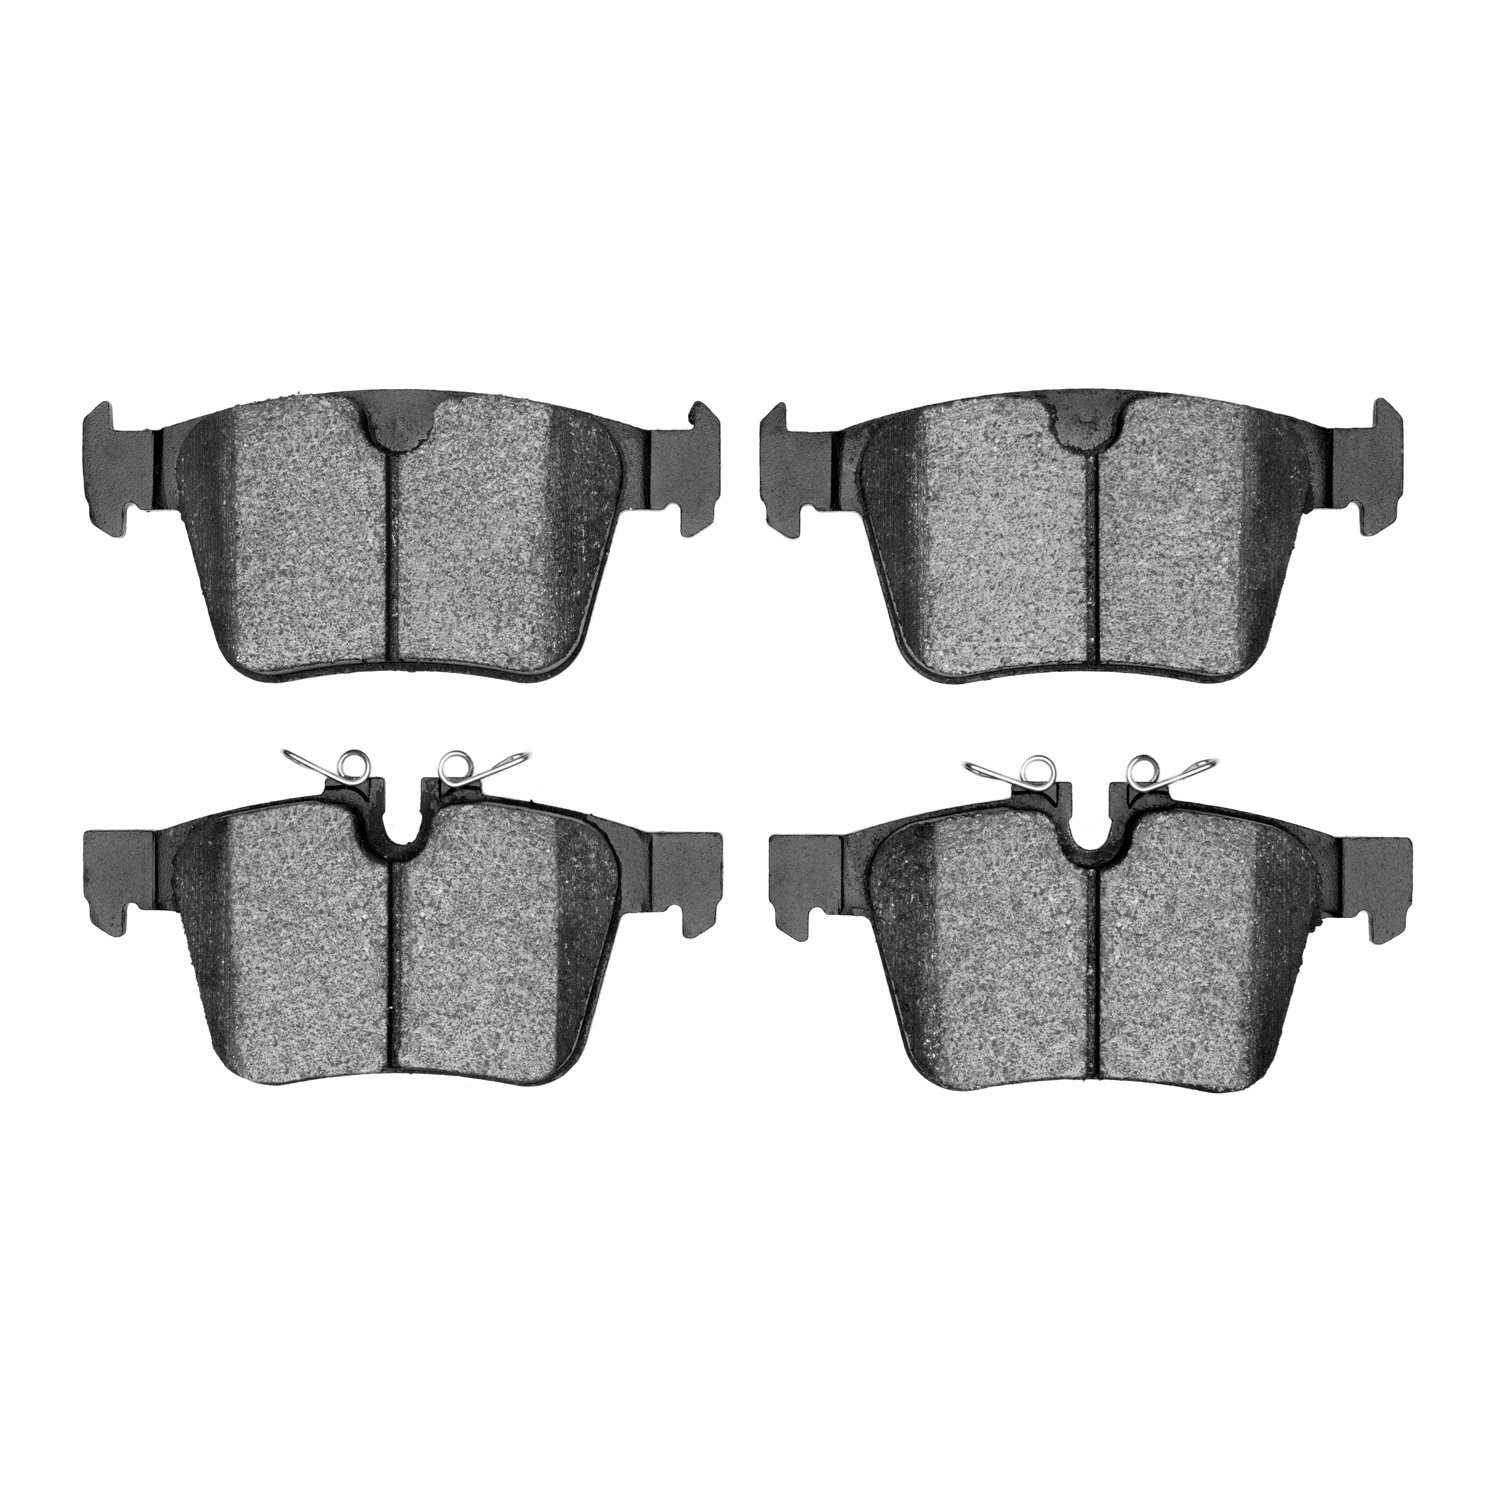 Track/Street Brake Pads, Fits Select Fits Multiple Makes/Models, Position: Rear